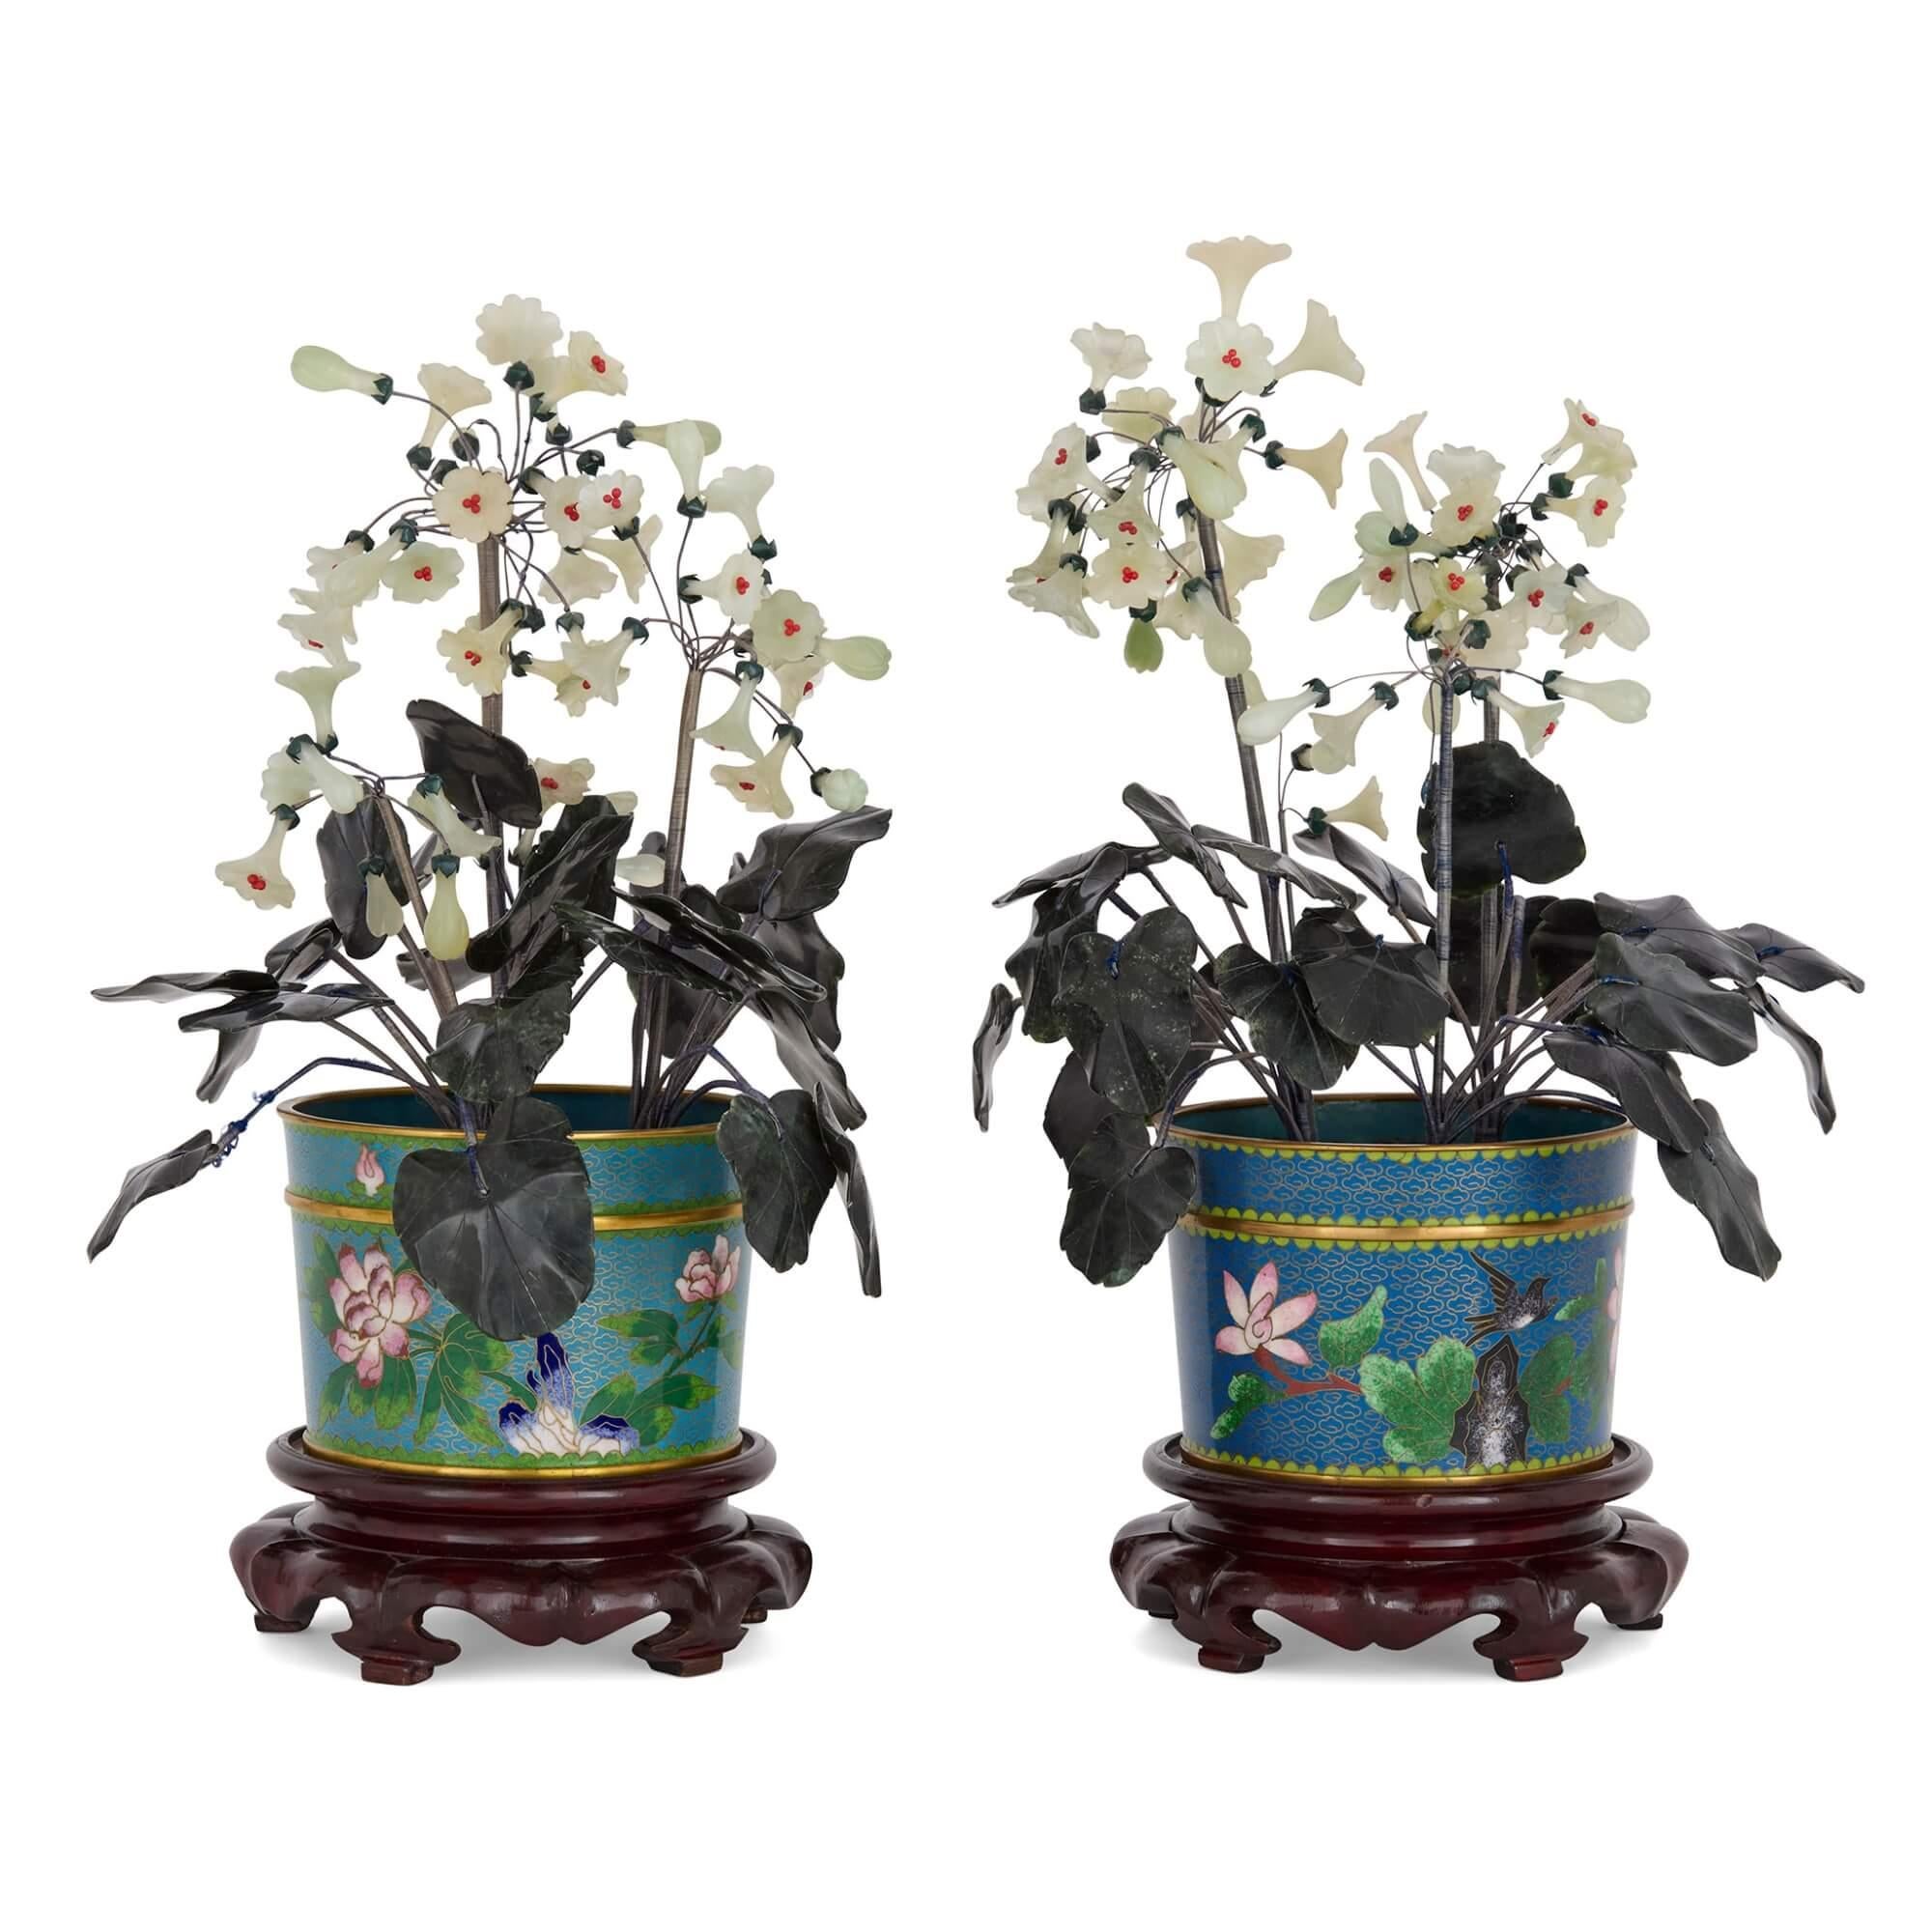 Pair of large Chinese hardstone, jade and cloisonné enamel flower models 
Chinese, 20th Century 
Height 39cm, width 25cm, depth 25cm 

Crafted in 20th century China, this pair of large flower models showcase the centuries-old technique of cloisonné